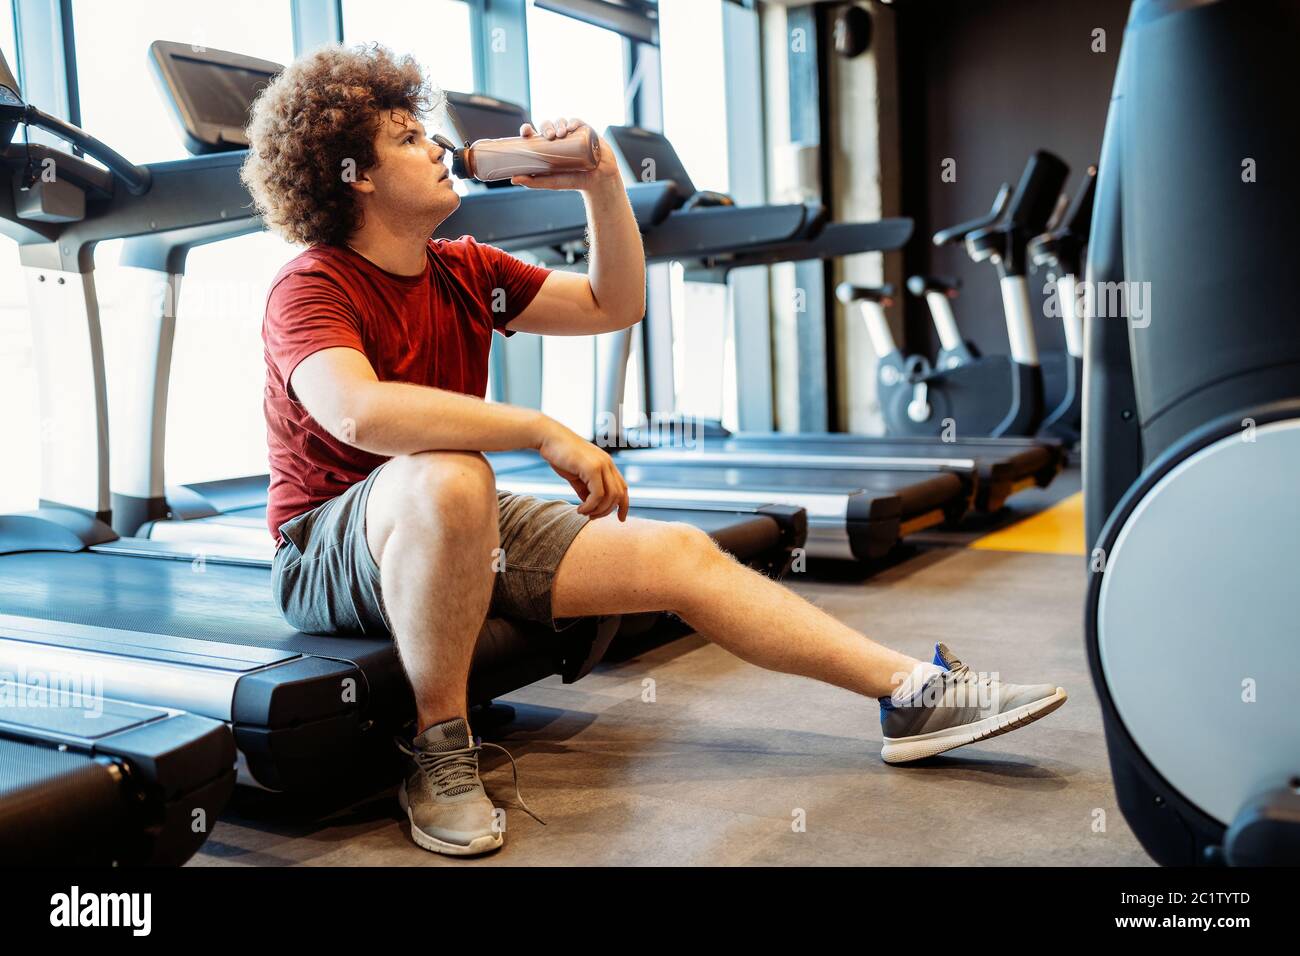 Overweight young man exercising in gym to achieve goals Stock Photo